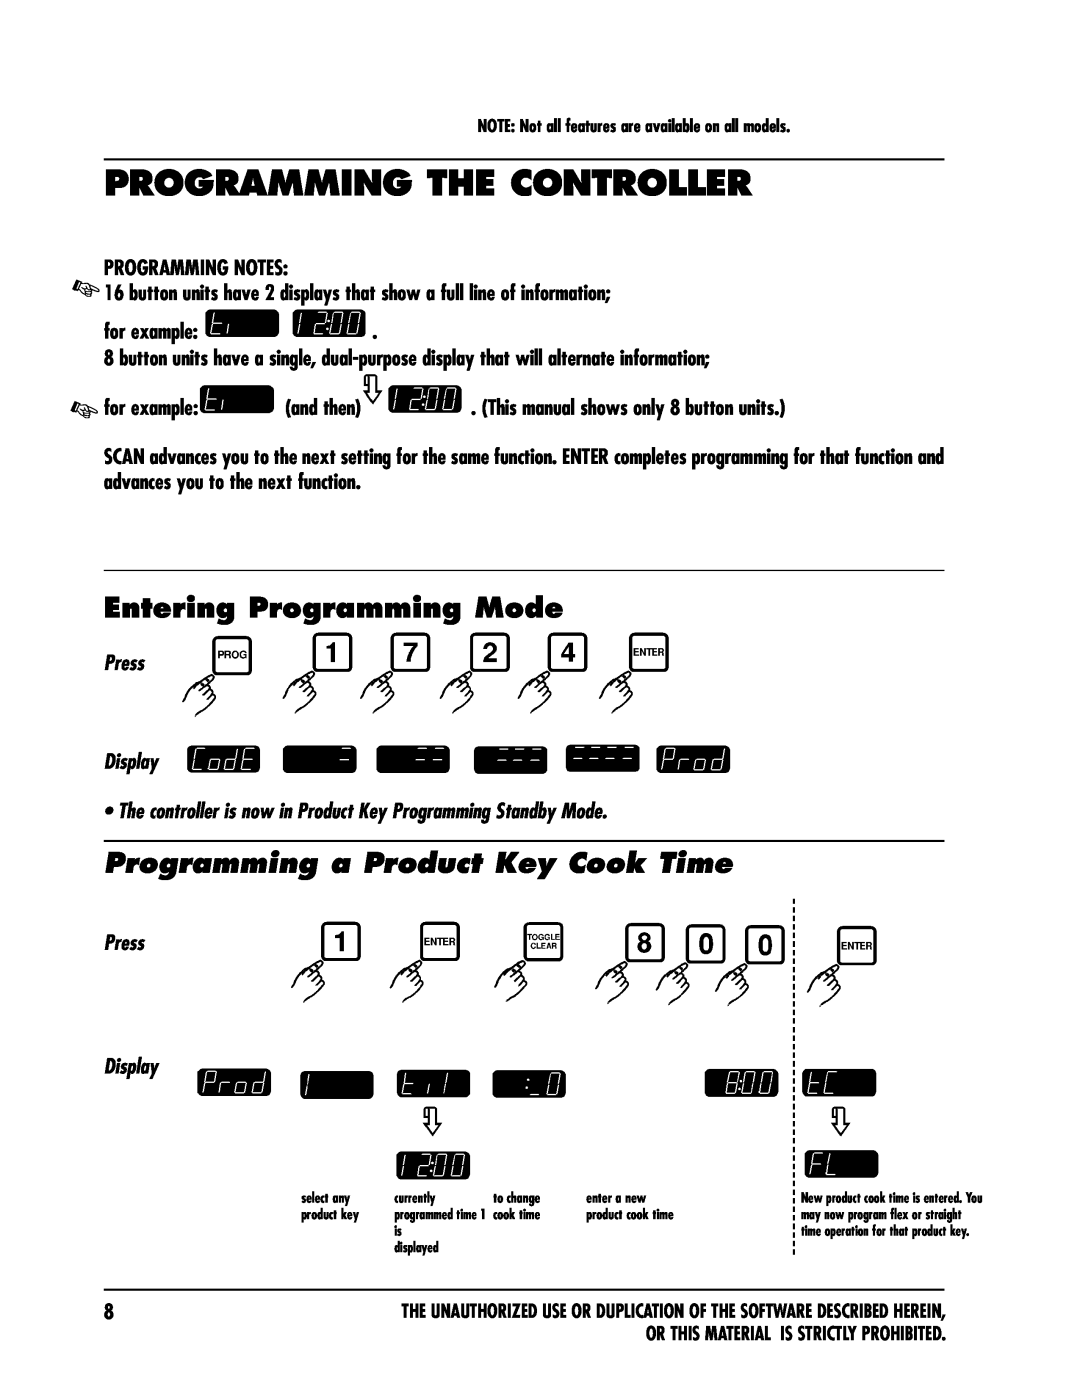 Keating Of Chicago IM-2000 Programming The Controller, Entering Programming Mode, Programming a Product Key Cook Time 